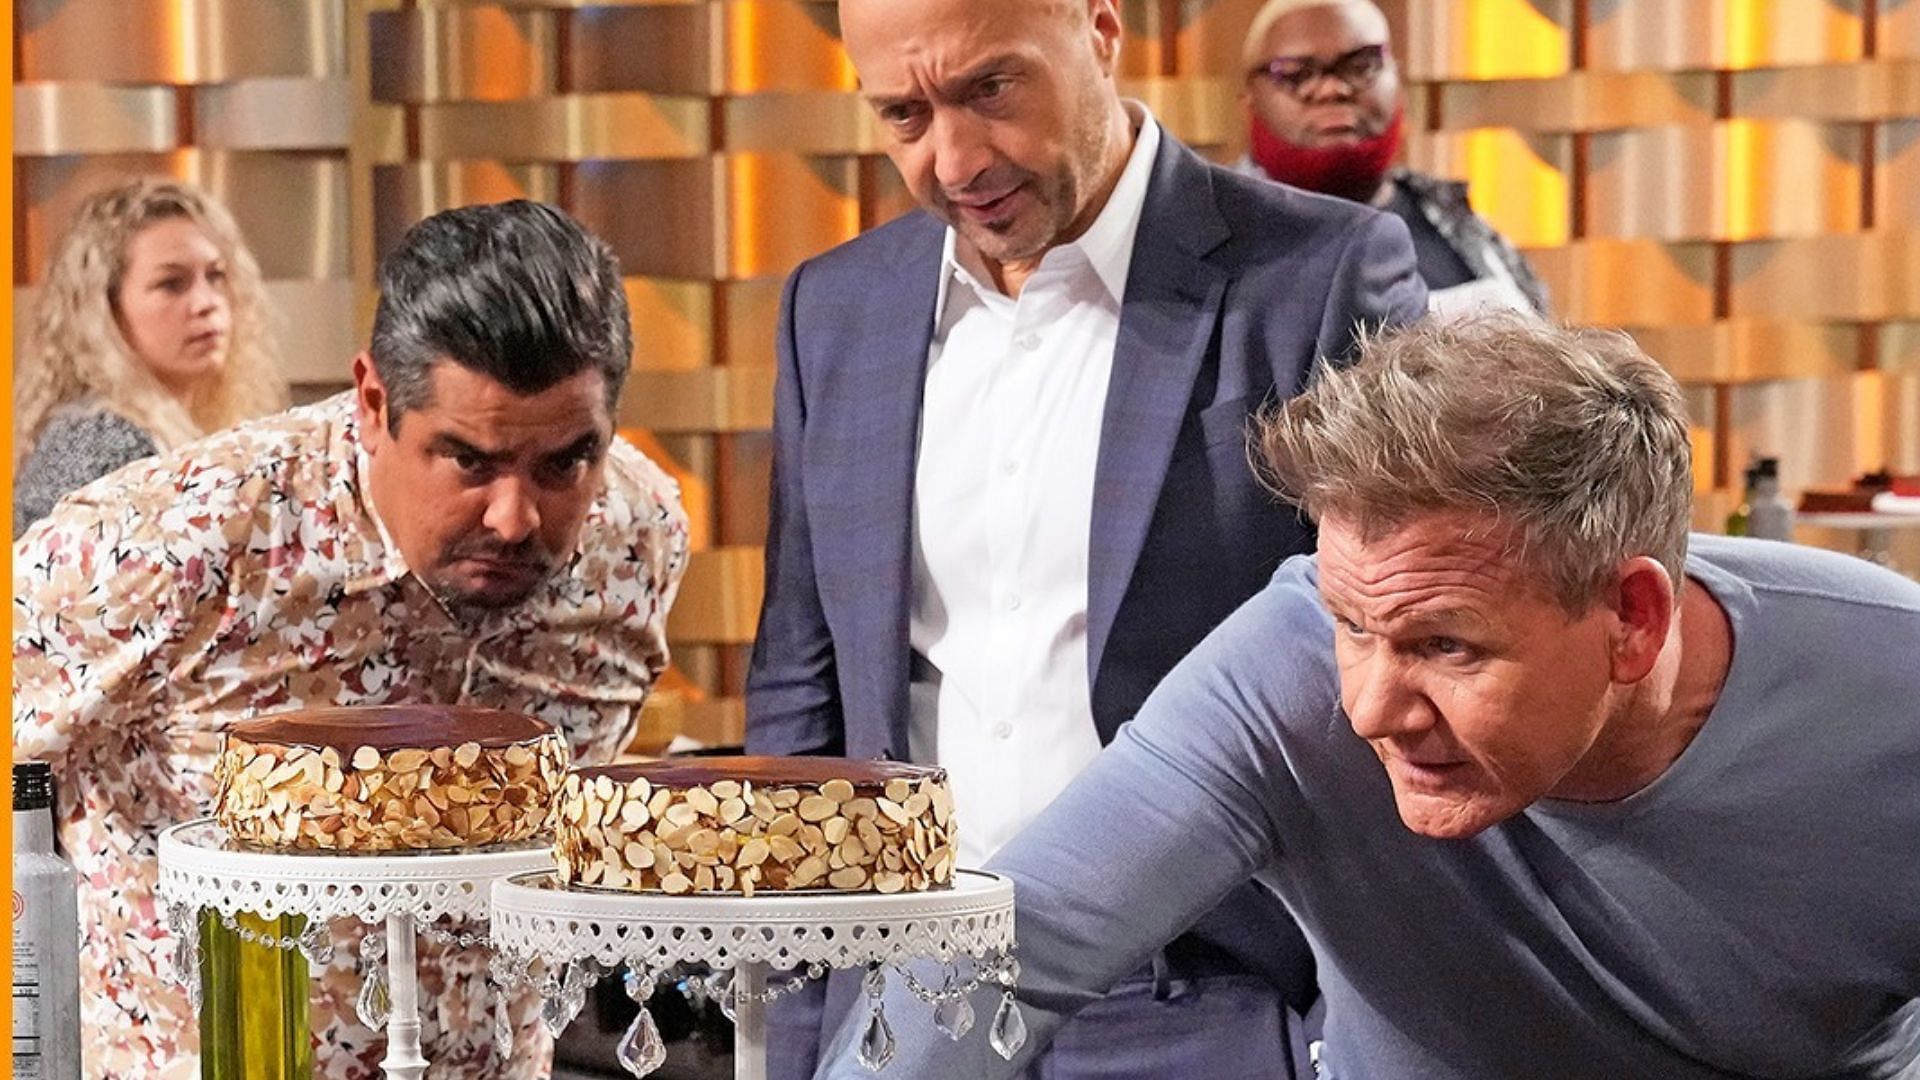 Contestants to face a baking challenge in episode 9 of MasterChef season 12 airing on July 27 (Image via masterchefonfox)